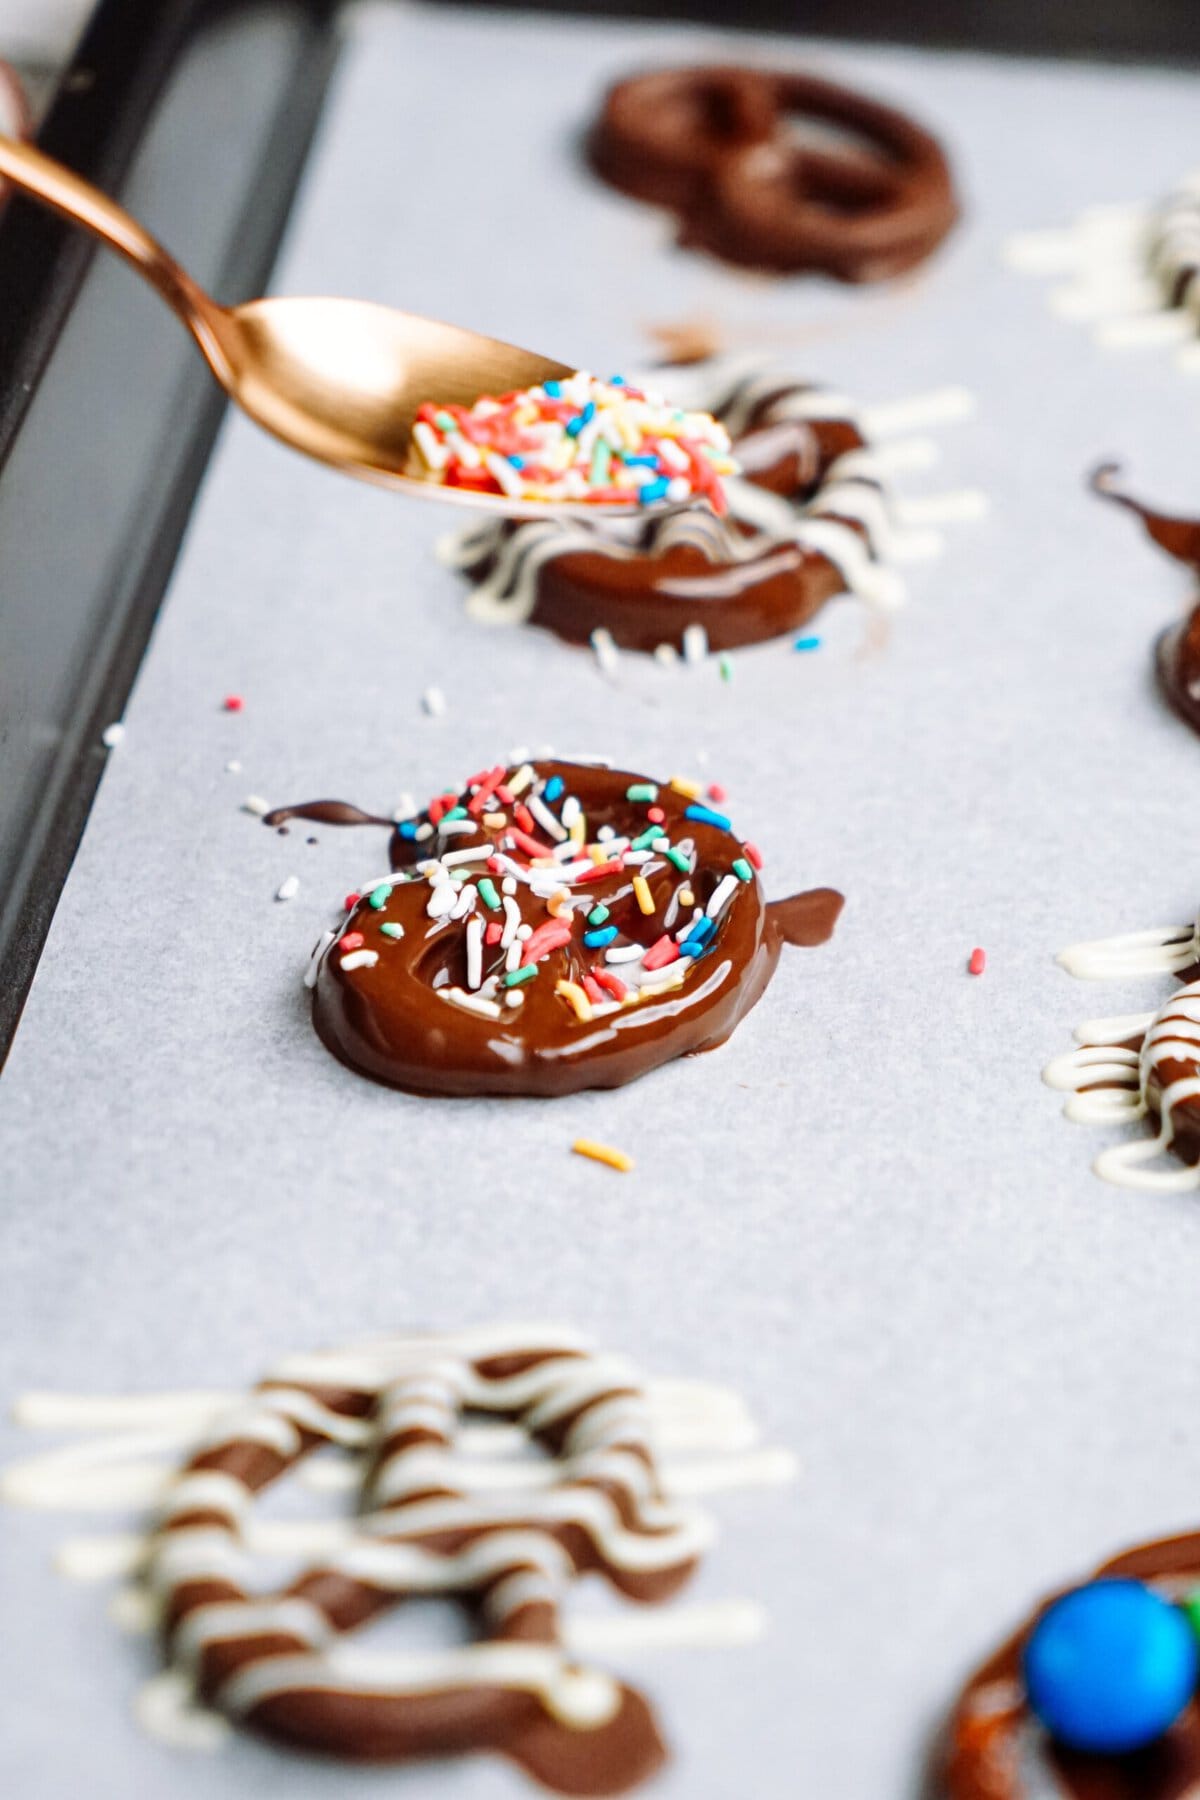 Chocolate covered pretzels with sprinkles on a baking sheet.